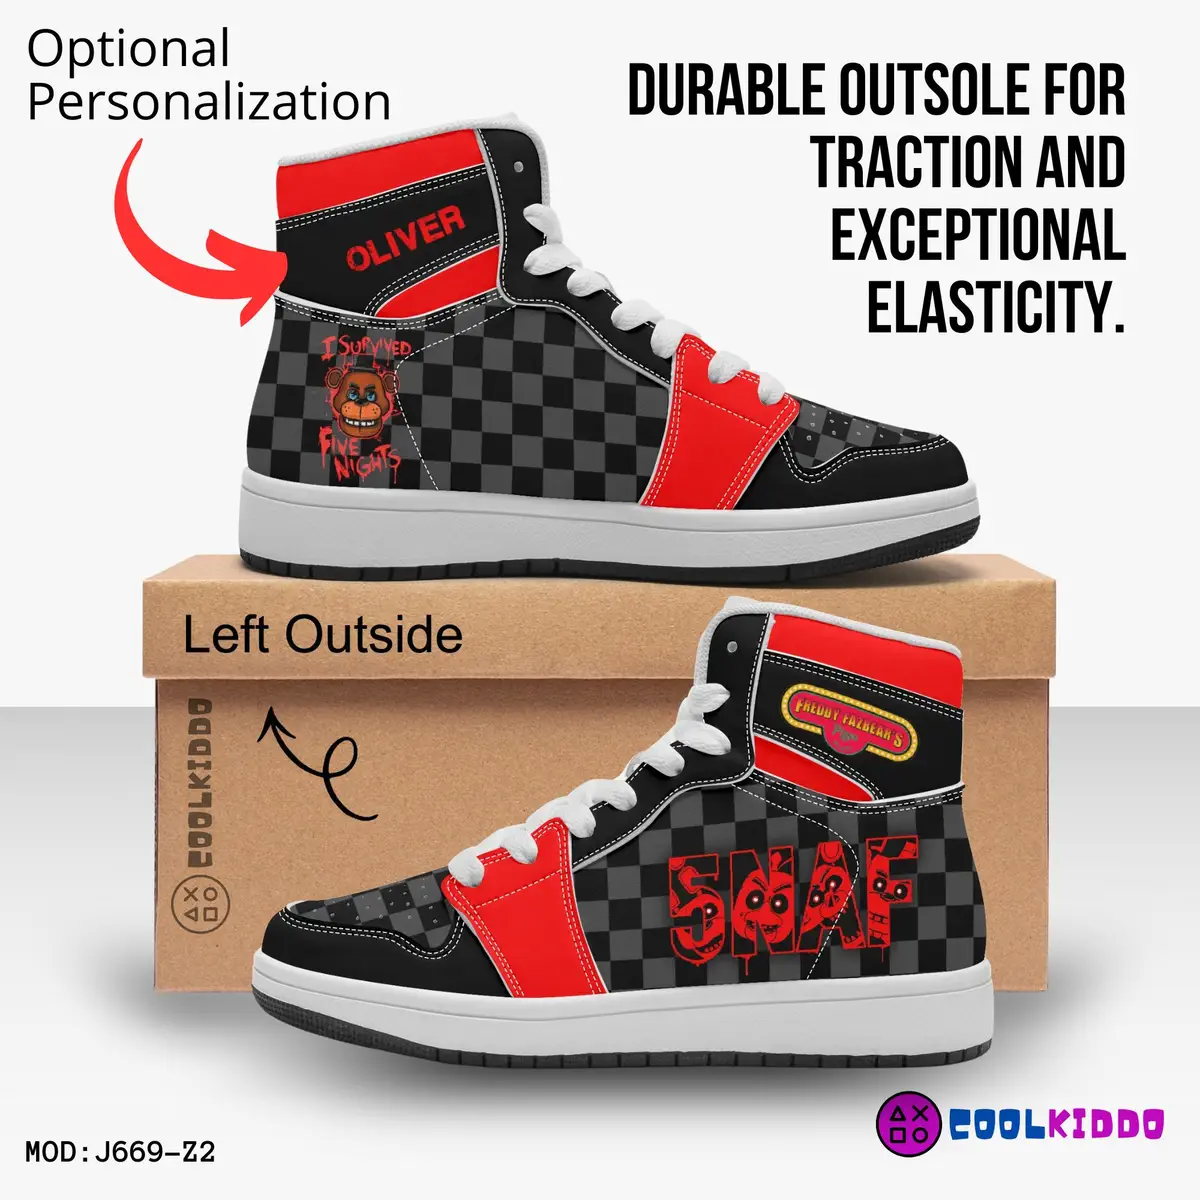 Five Nights at Freddy’s Inspired Character High-Top Kids Black and Red Leather Shoes, FNAF Jordans Style Sneakers Cool Kiddo 20